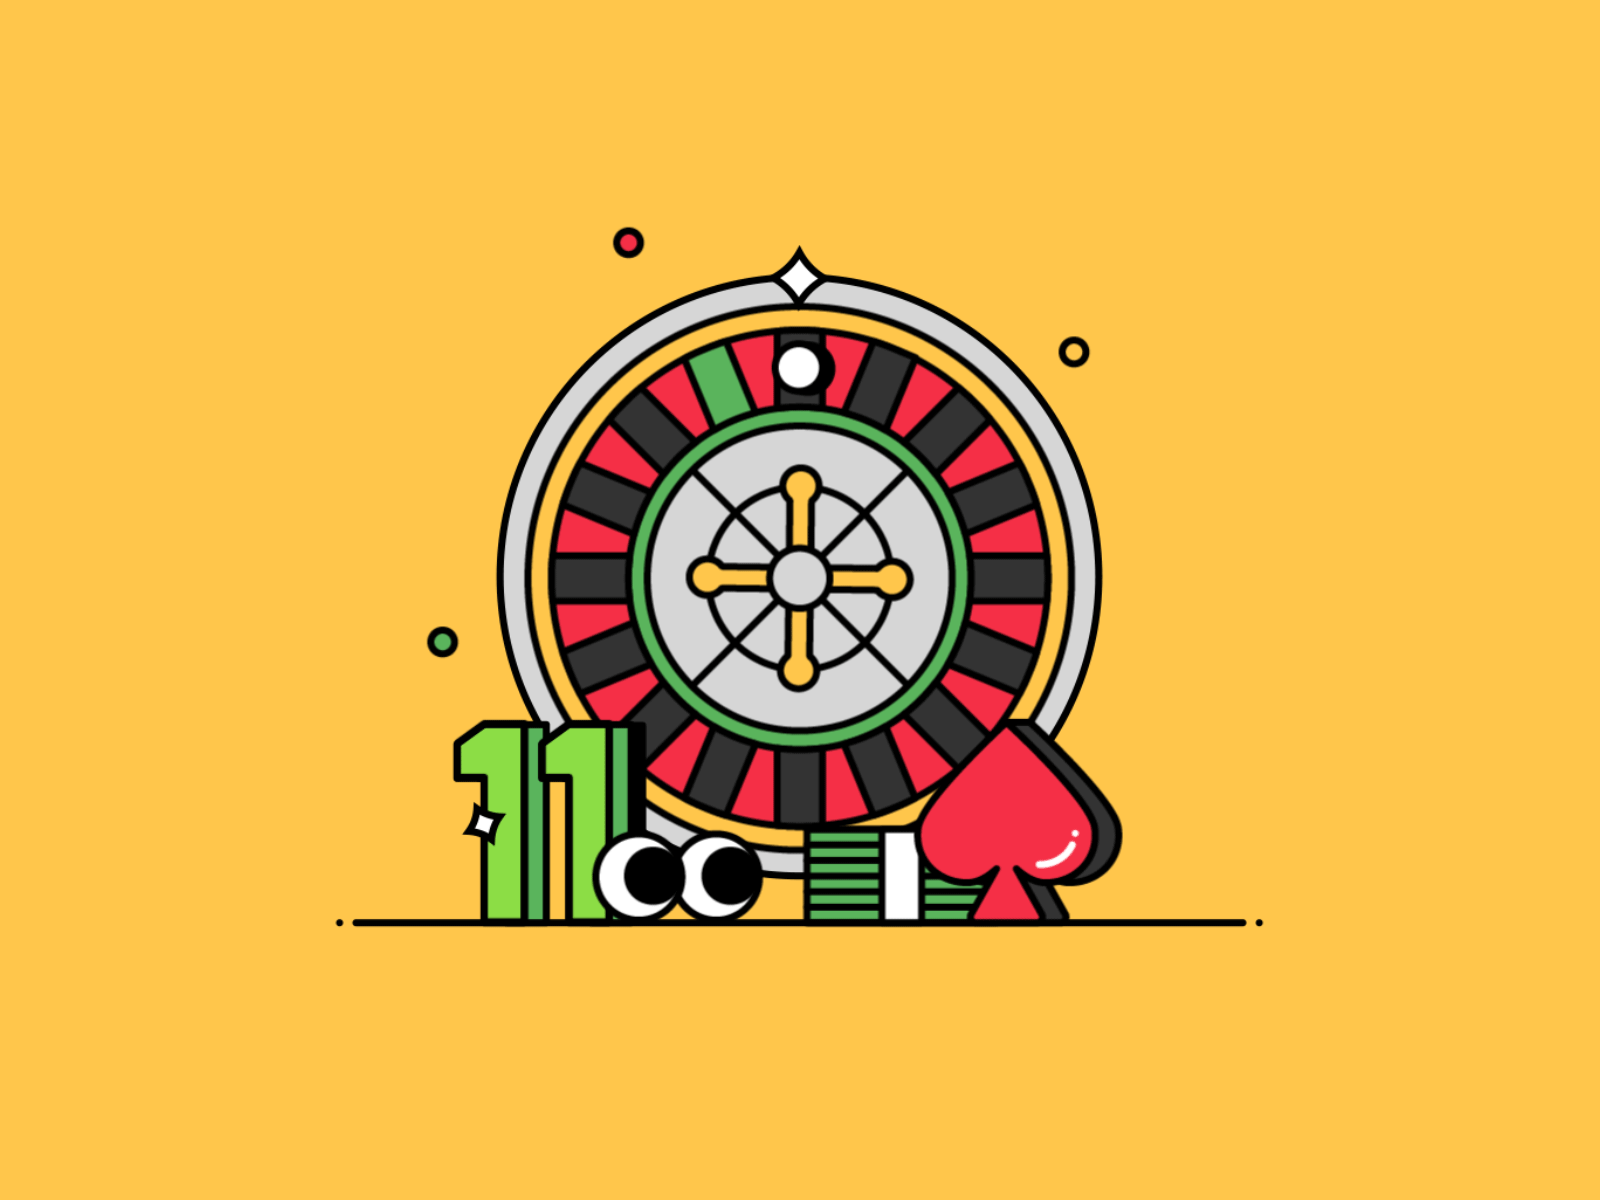 O is for Oceans Eleven 🎰 💰 🇺🇸 36 days of type animation casino character gamble icon illustration logo loop motion shadow typography